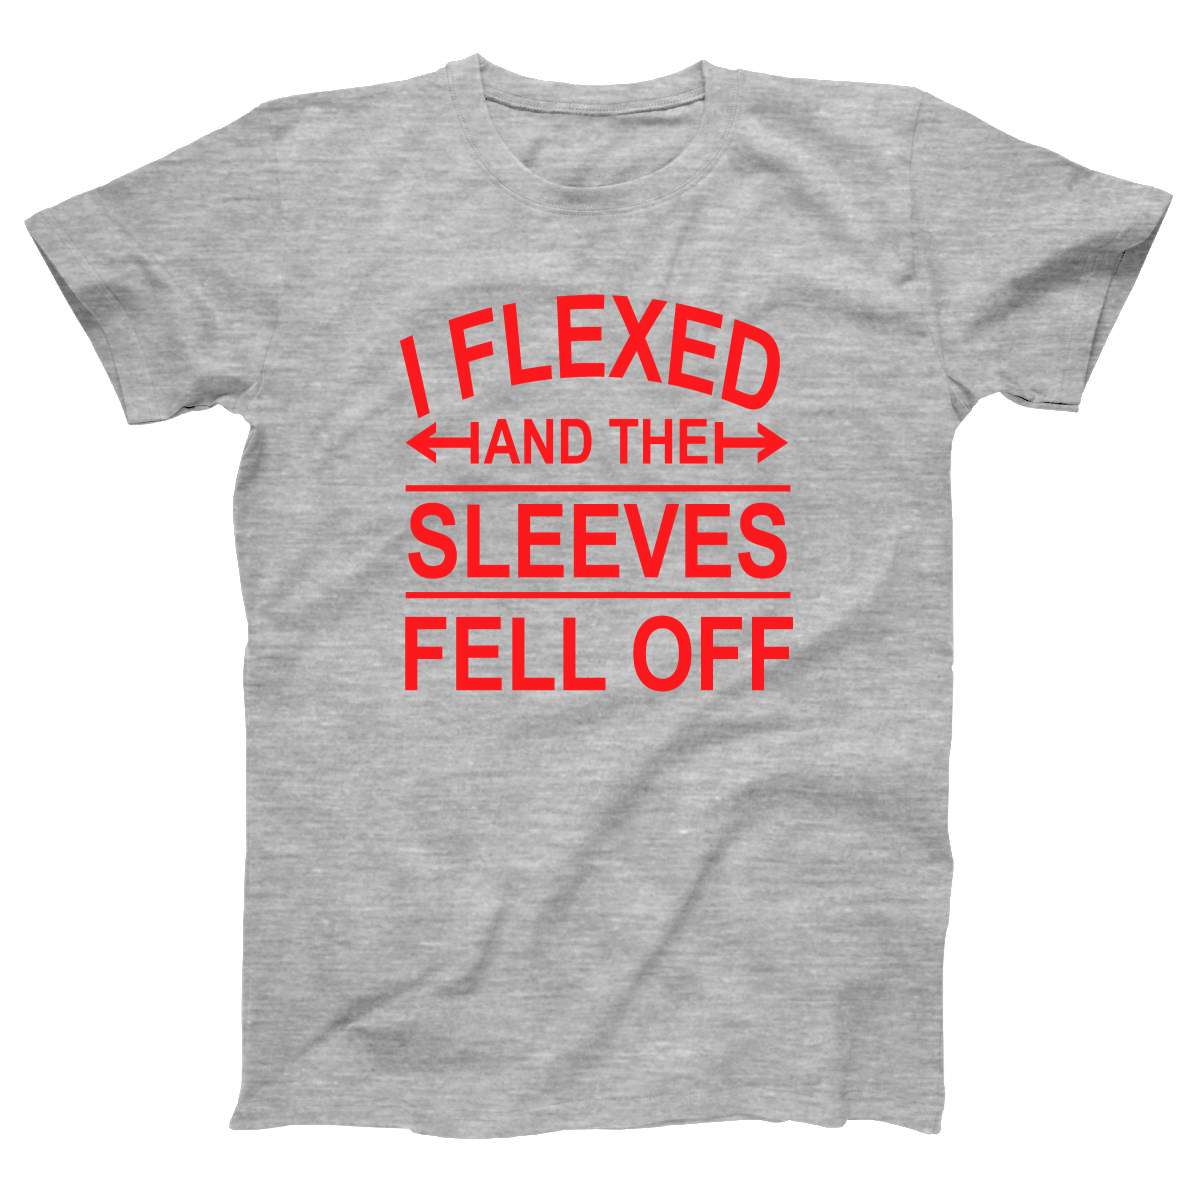 I Flexed and the sleeves fell off Women's T-shirt | Gray